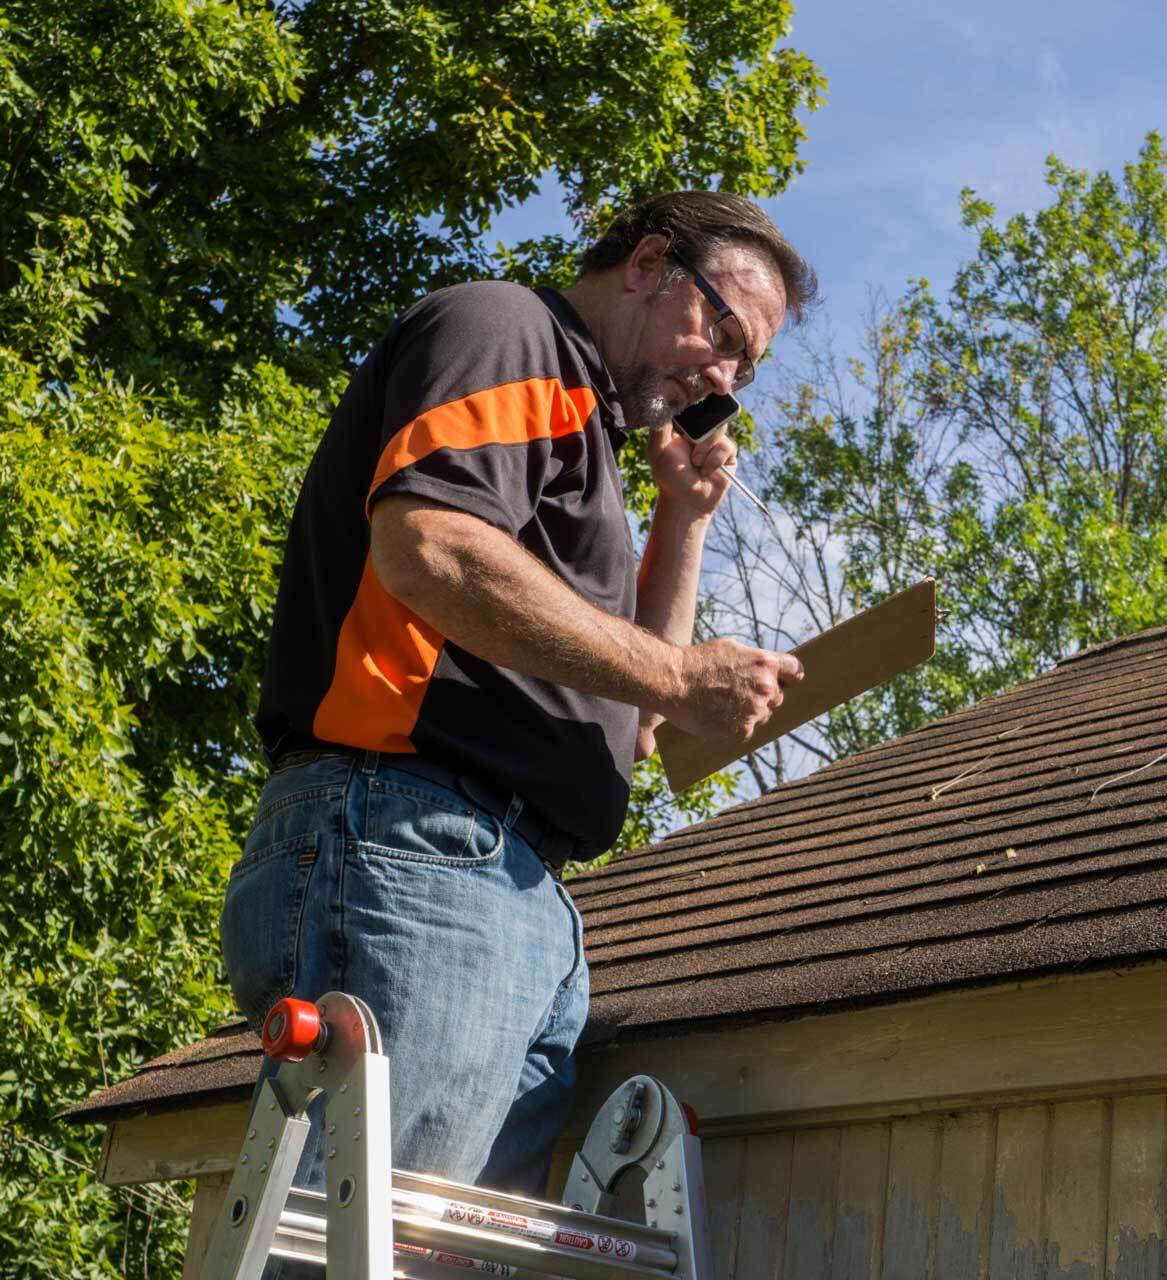 Contractor-on-ladder-with-cell-phone-figuring-out-hail-damage-repair-costs-for-customer